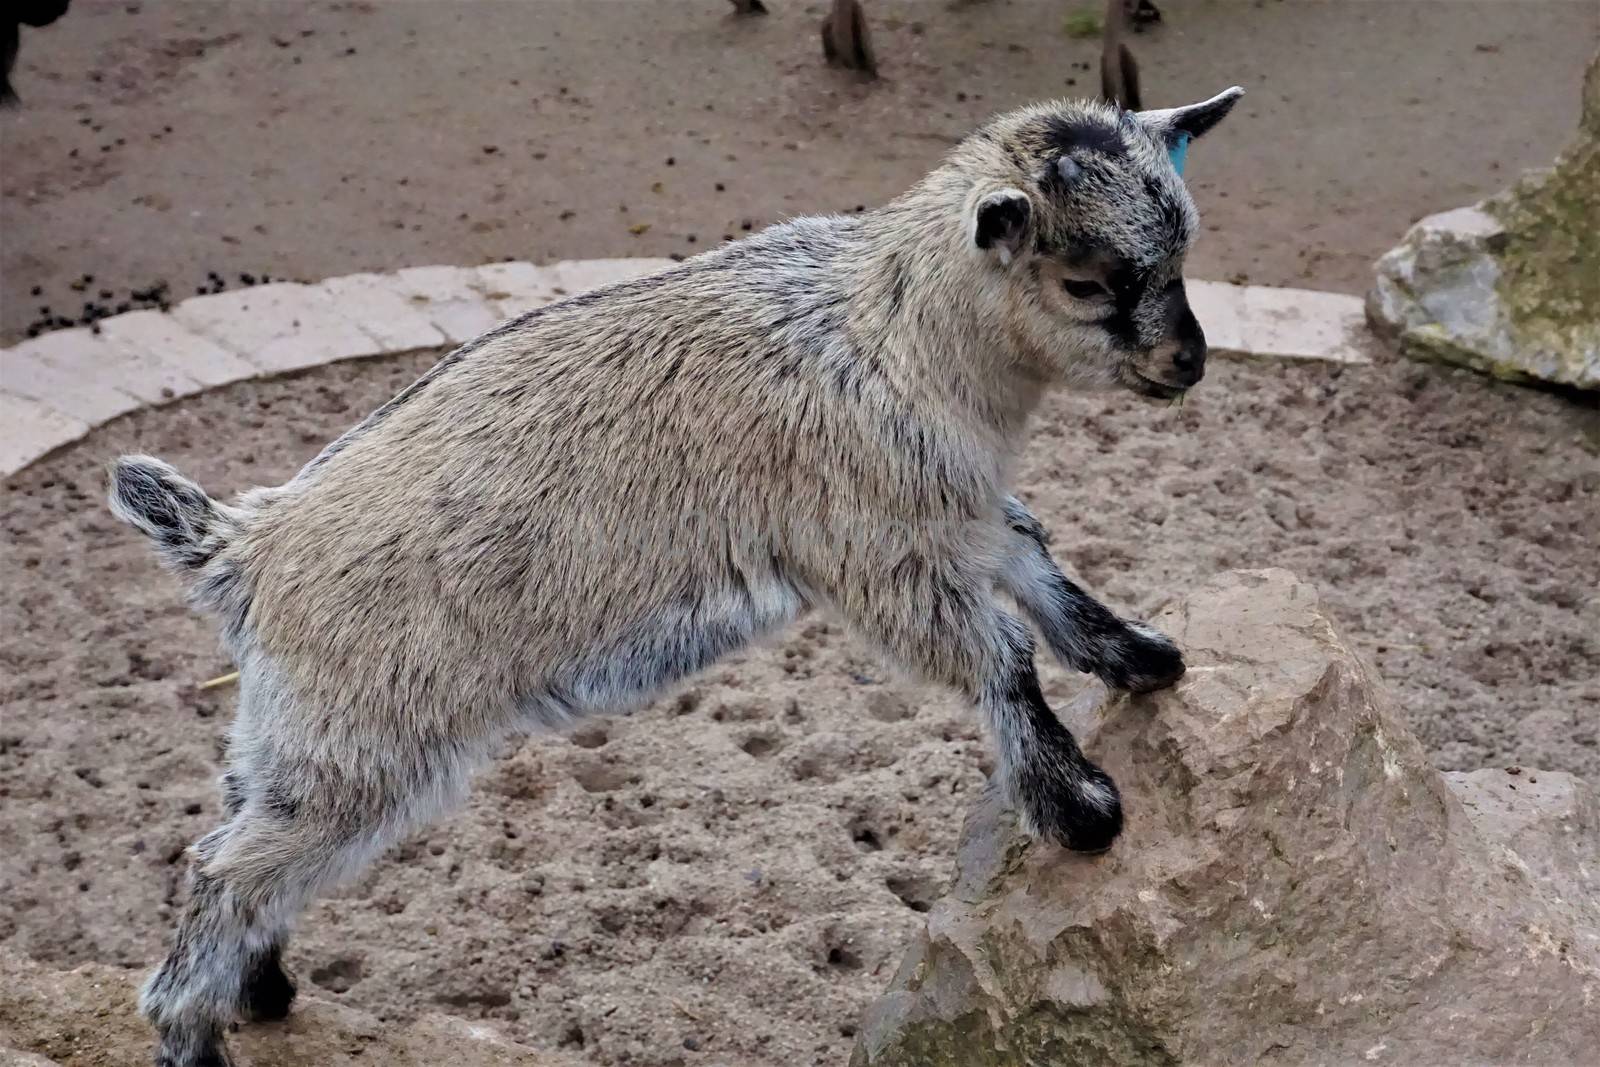 Little baby goat standing on rock by pisces2386